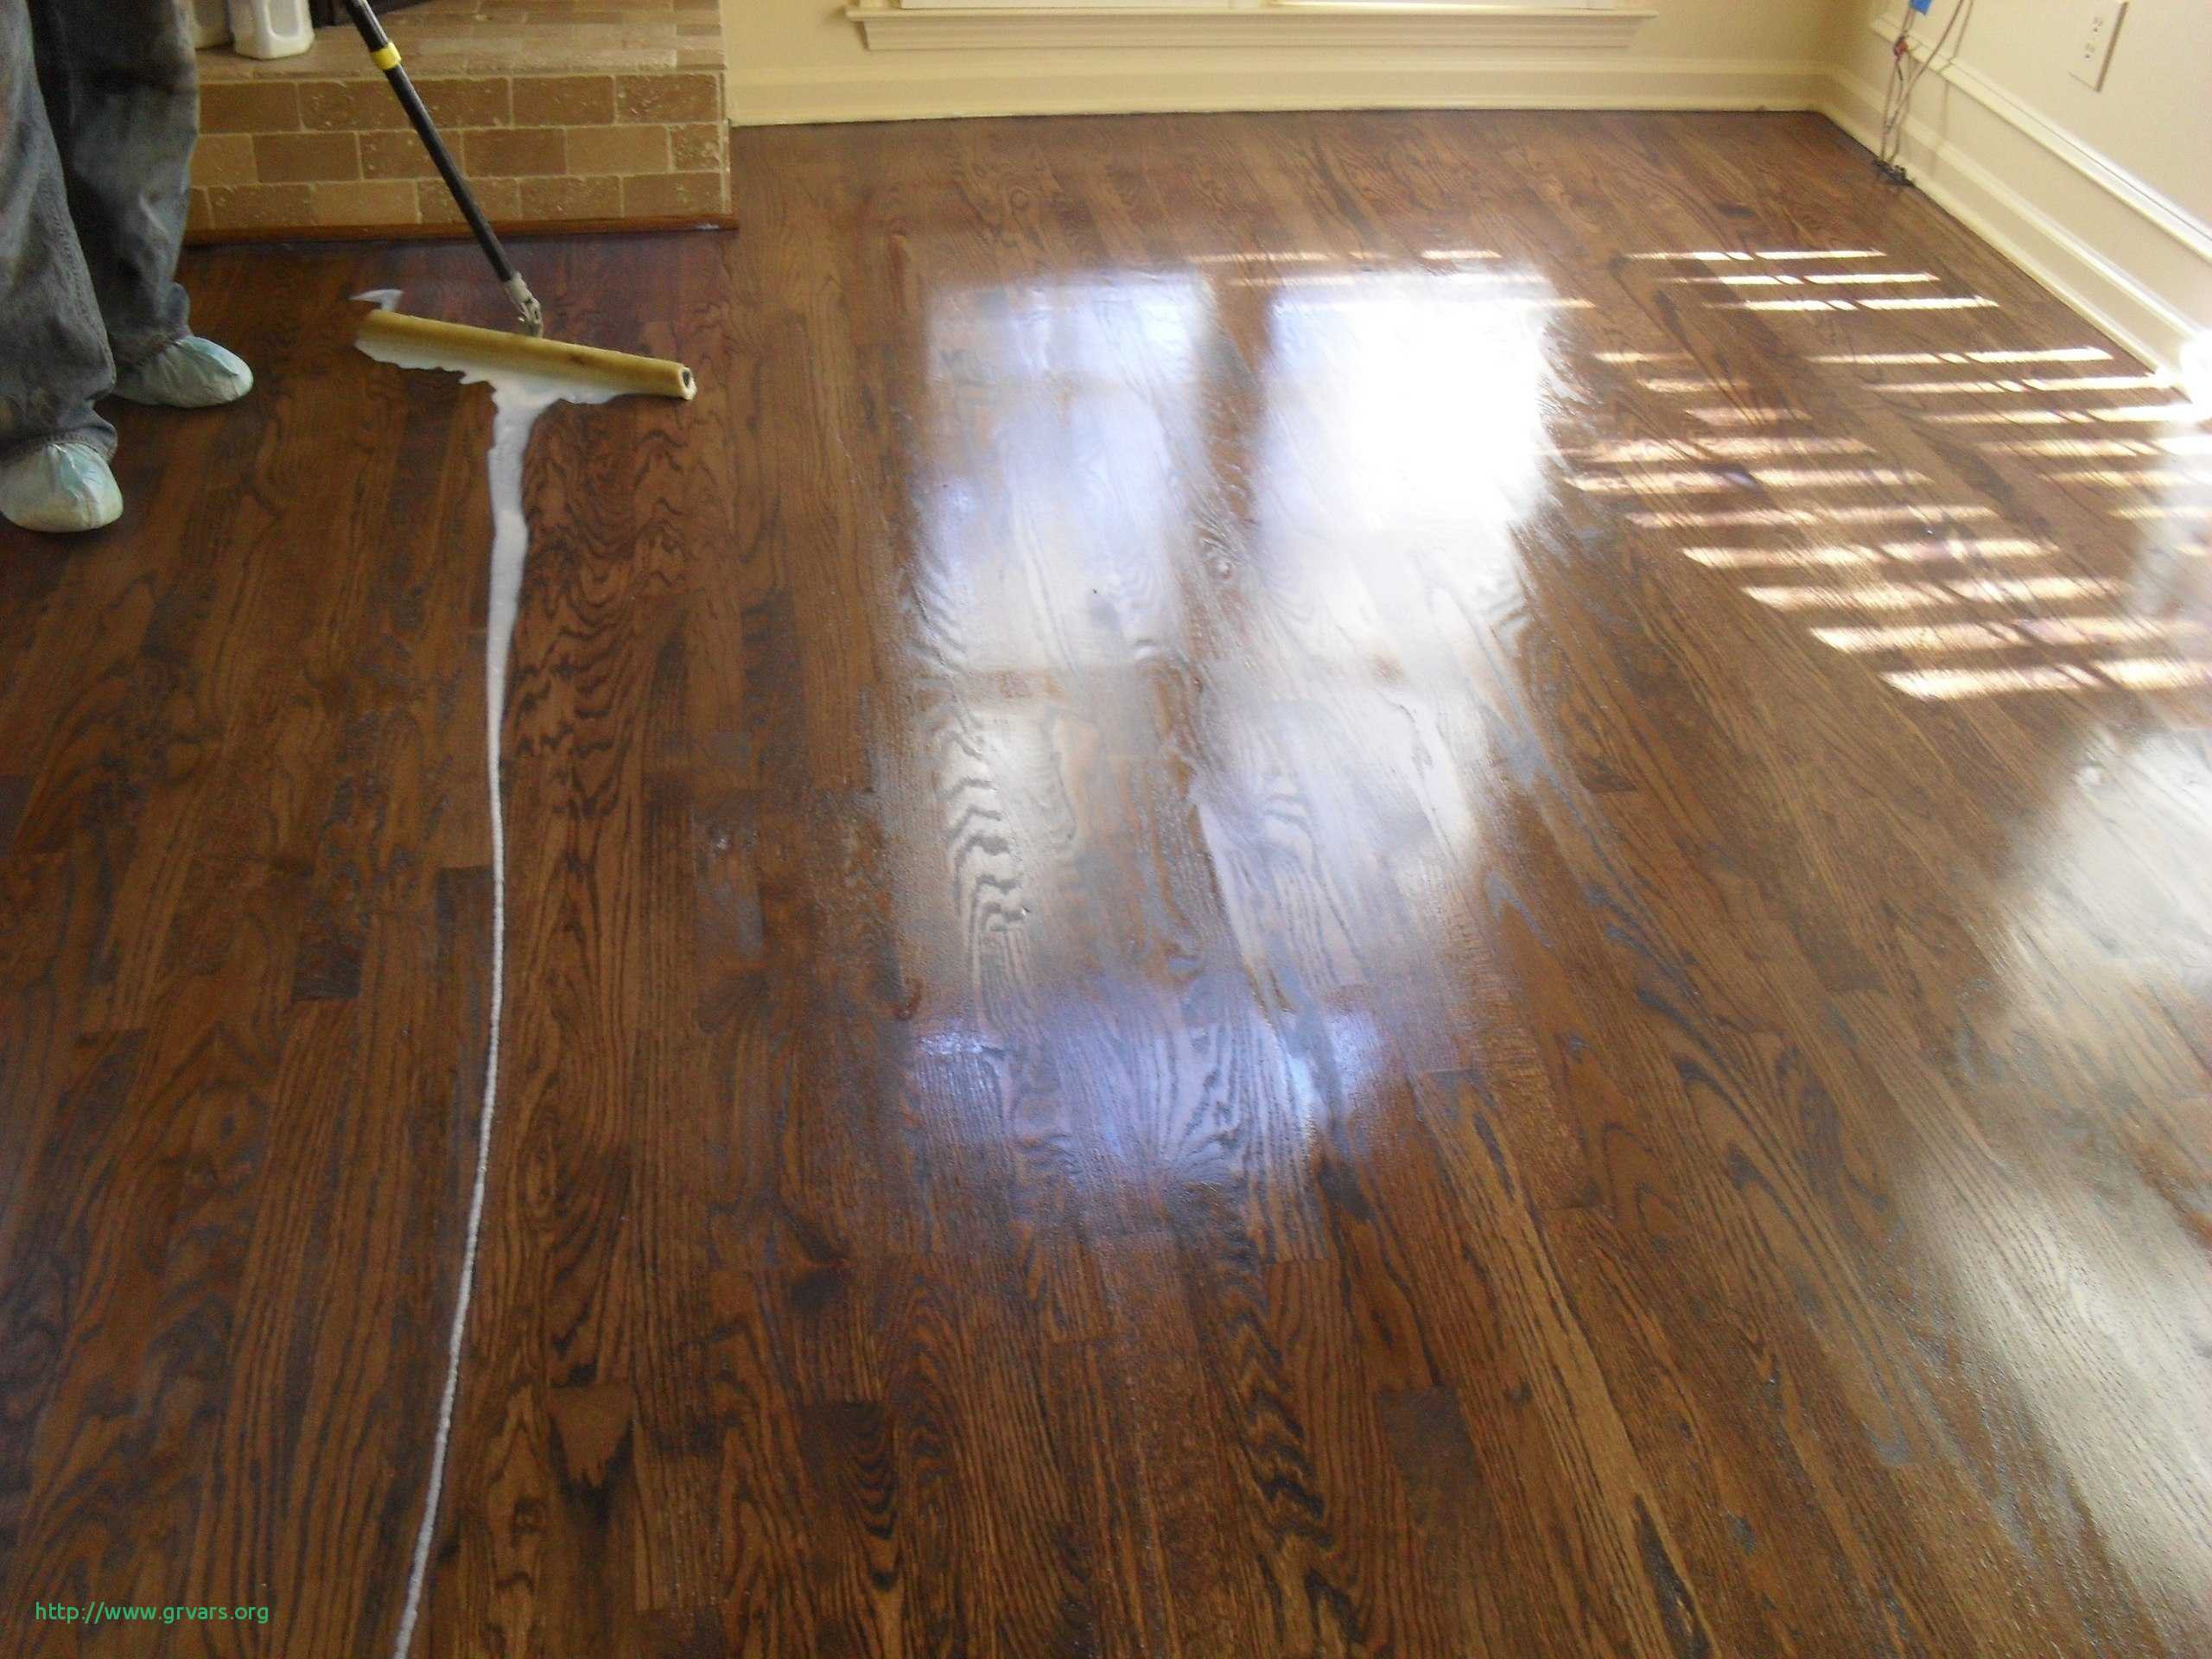 13 Great How to Refinish Hardwood Floors with Pet Stains 2024 free download how to refinish hardwood floors with pet stains of image number 6563 from post restoring old hardwood floors will for nouveau hardwood floors yourself ideas restoring old will inspirant redo